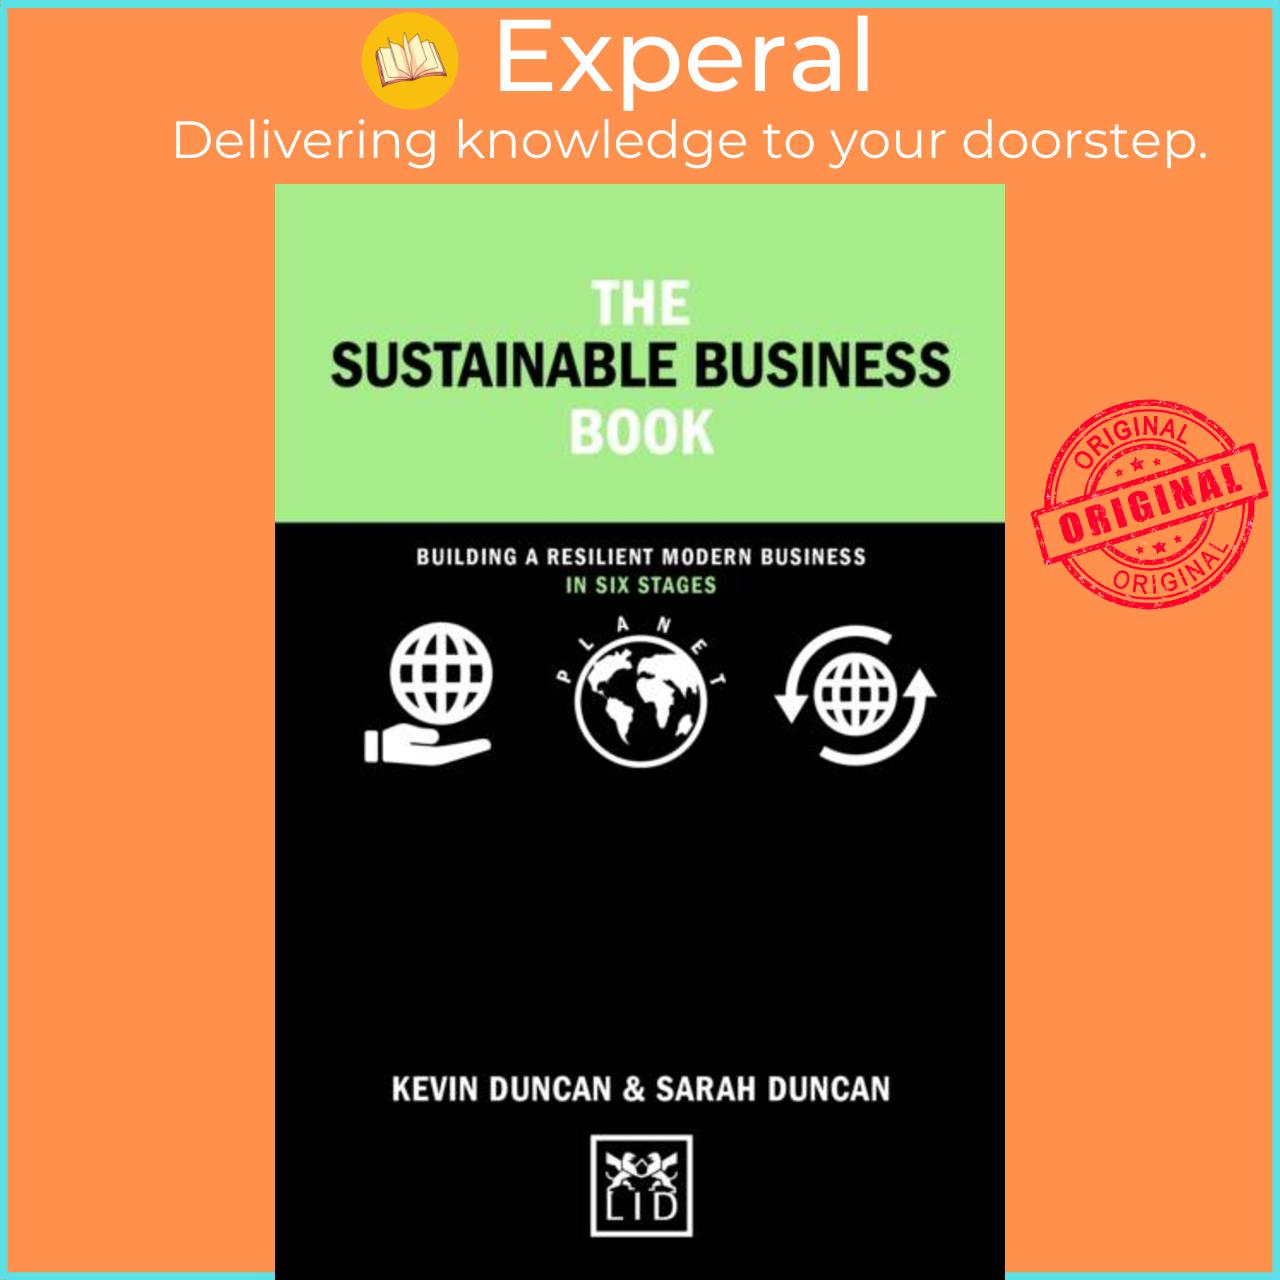 Sách - The Sustainable Business Book - Building a resilient modern business in s by Sarah Duncan (UK edition, hardcover)